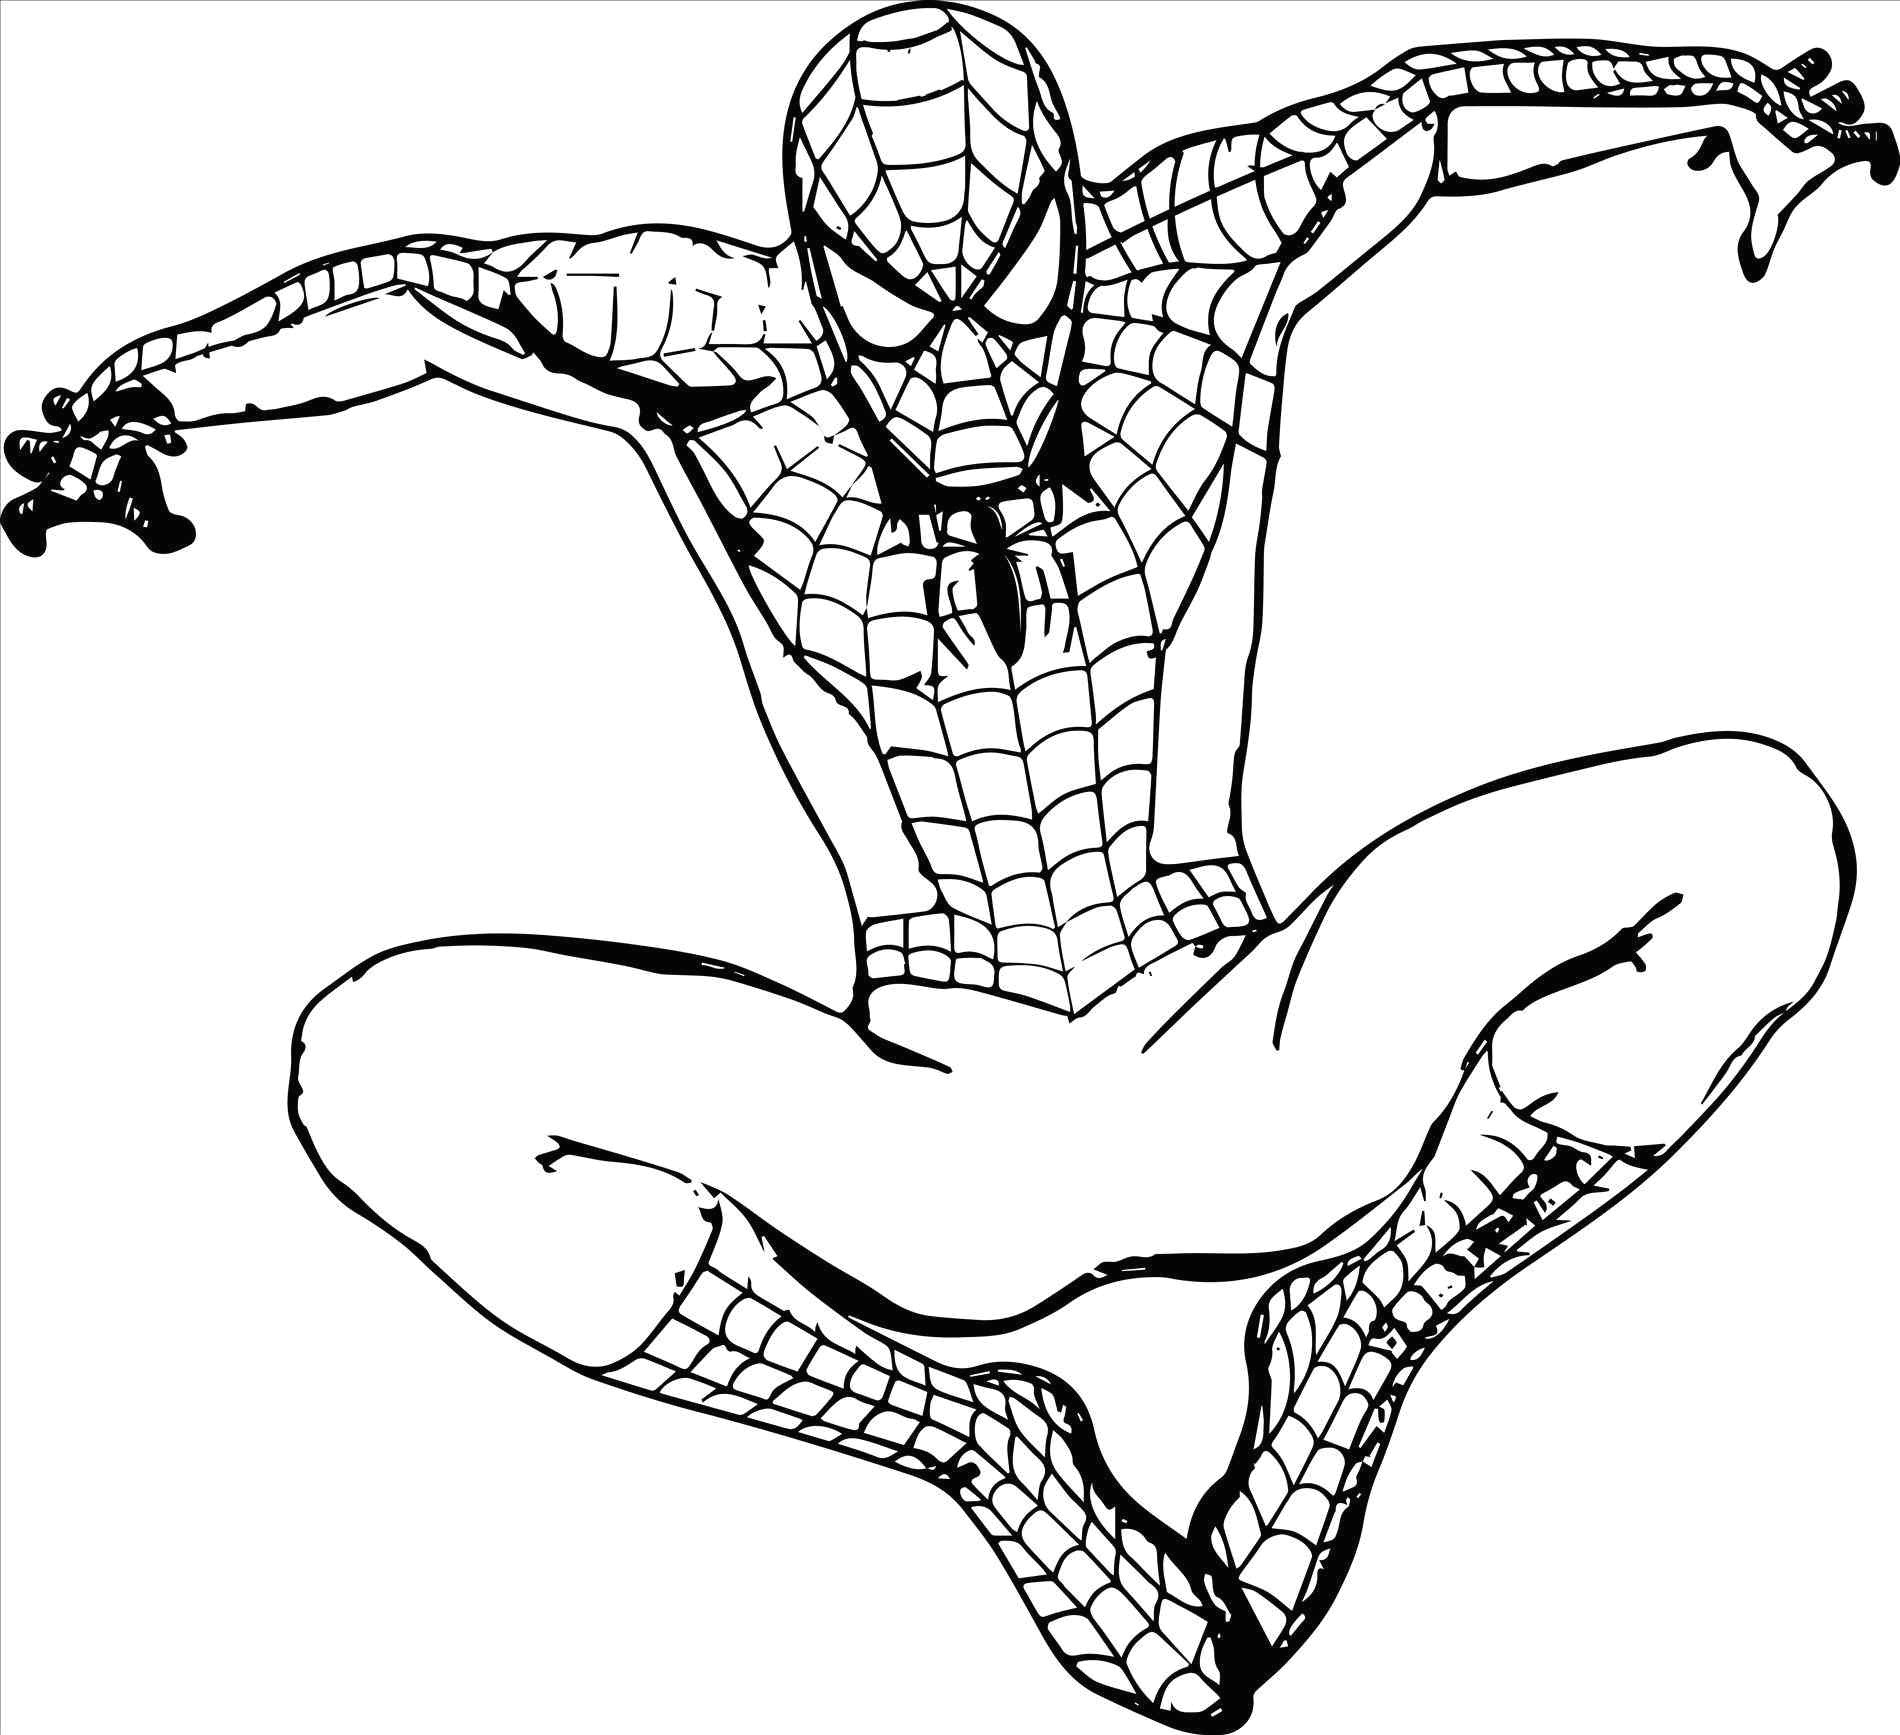 Z Clip Drawing Spiderman Coloring Pages to Print Luxury Superheroes Easy to Draw